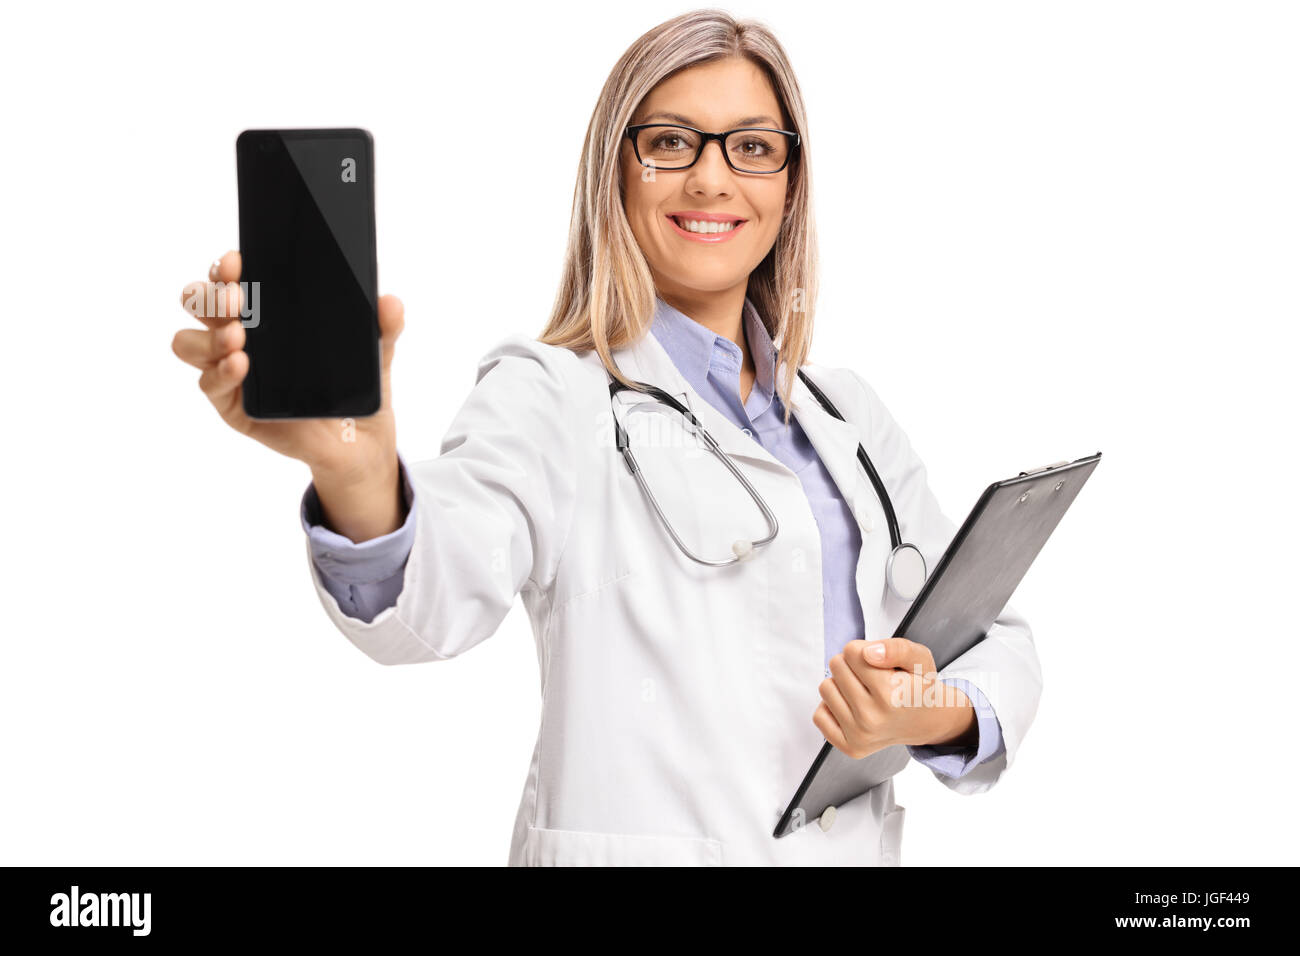 Female doctor with a clipboard showing a phone isolated on white background Stock Photo